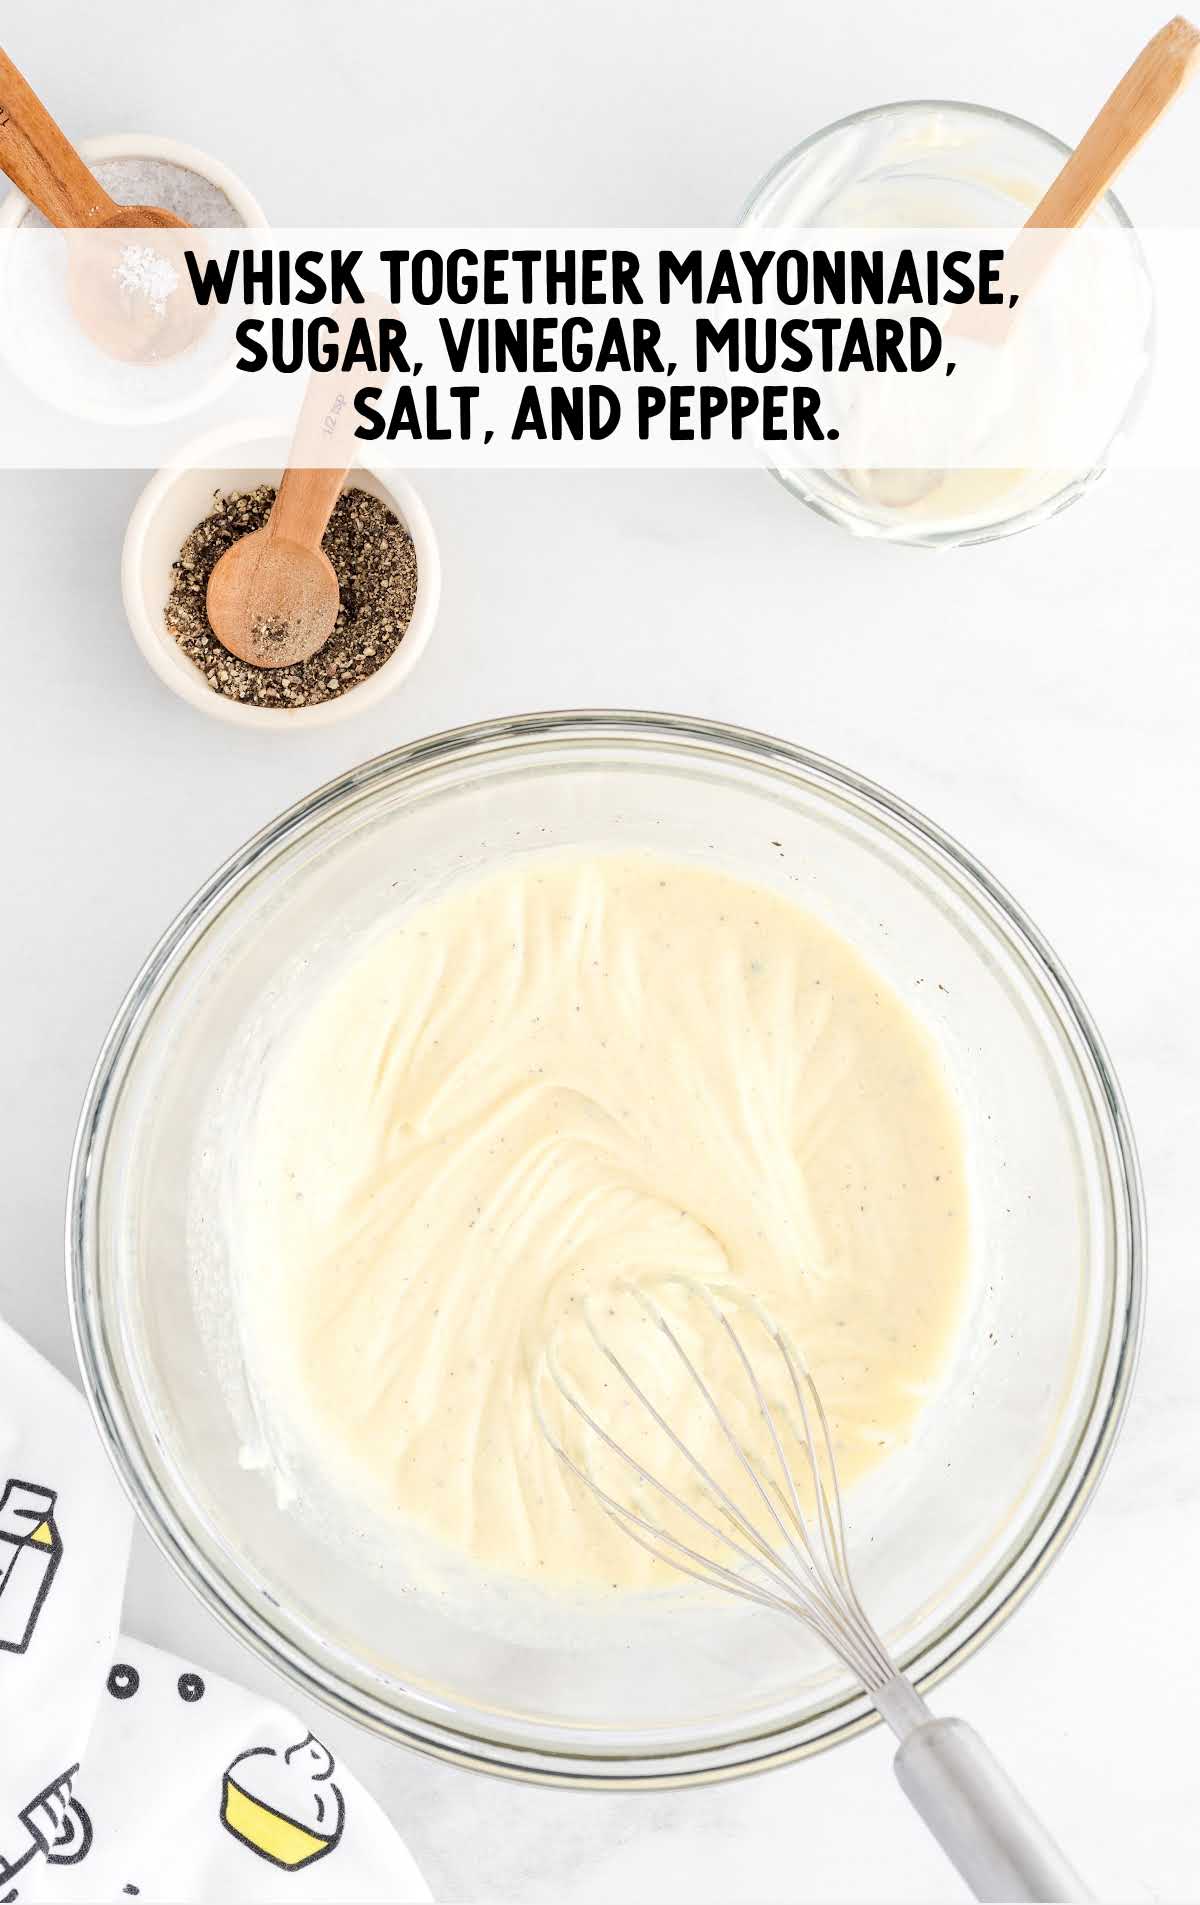 mayonnaise, sugar, vinegar, mustard, salt and pepper whisked together in a bowl